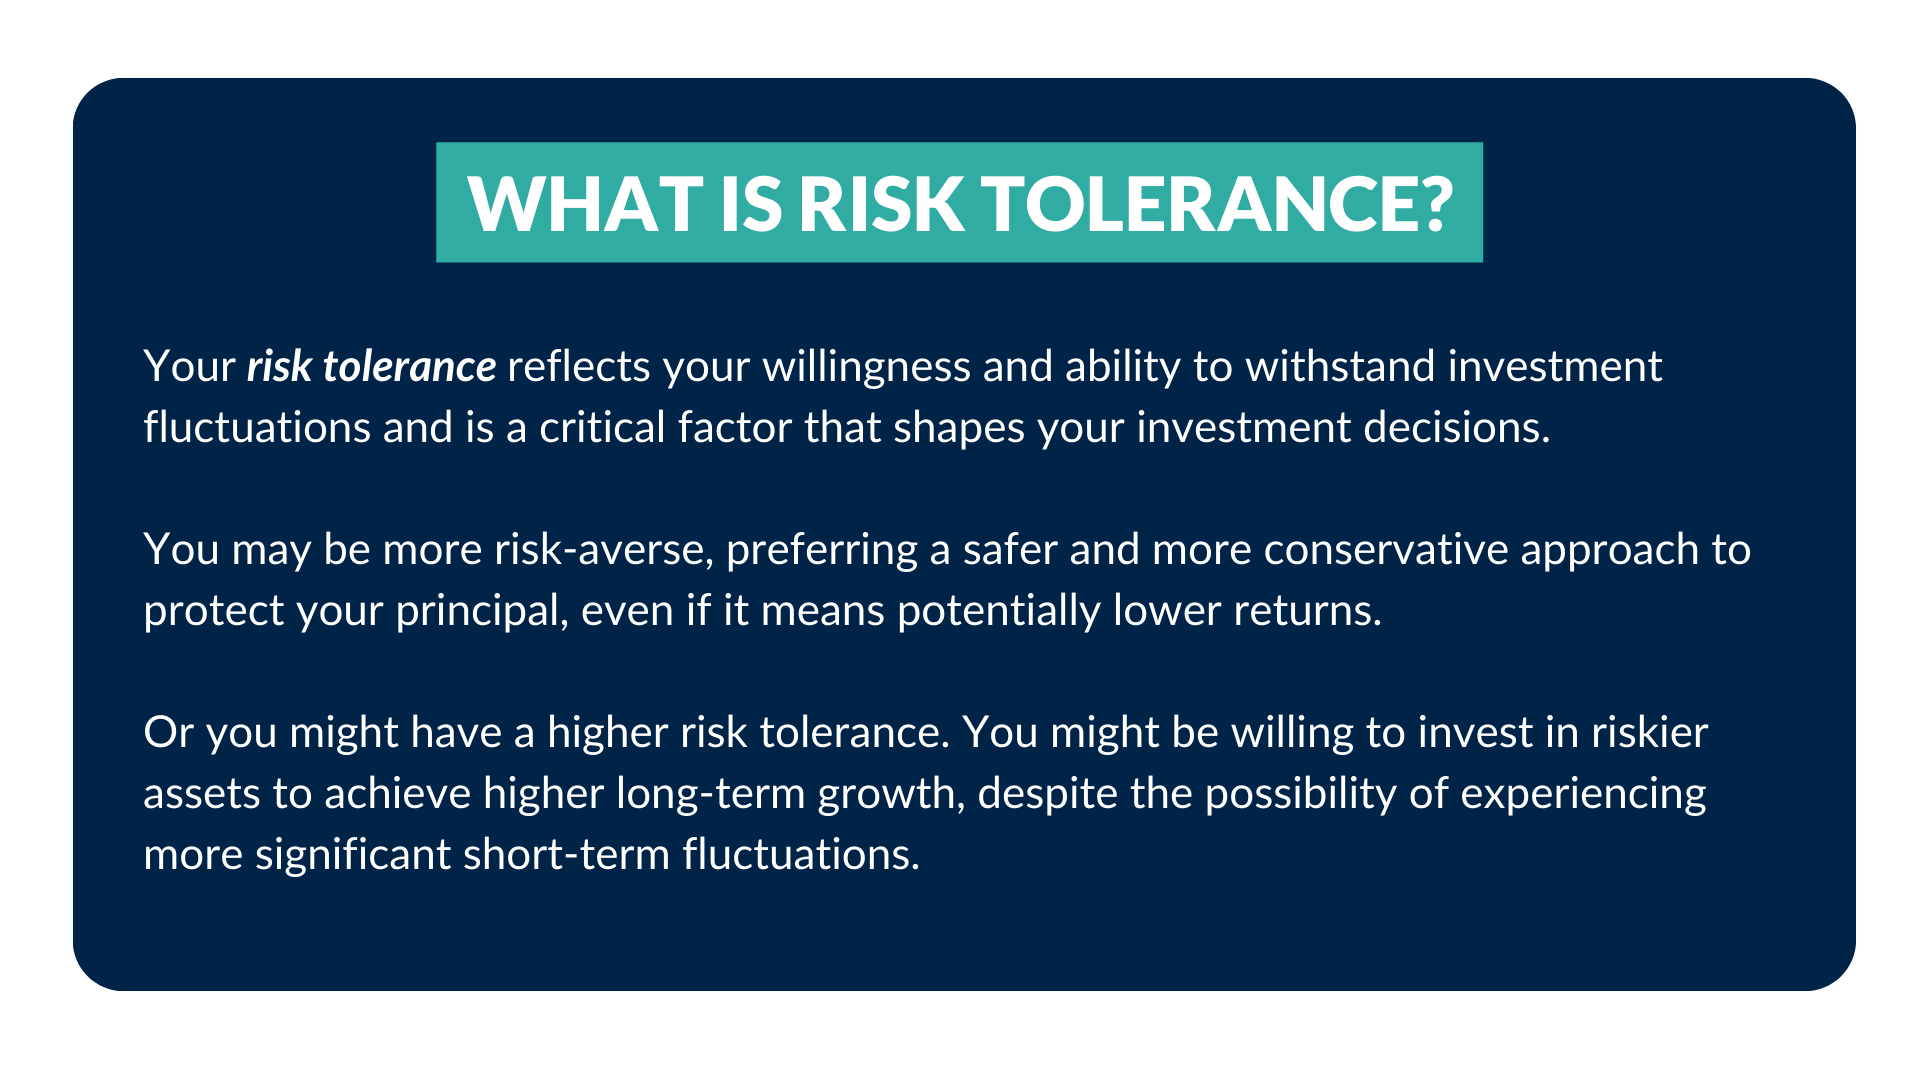 What is Risk Tolerance?